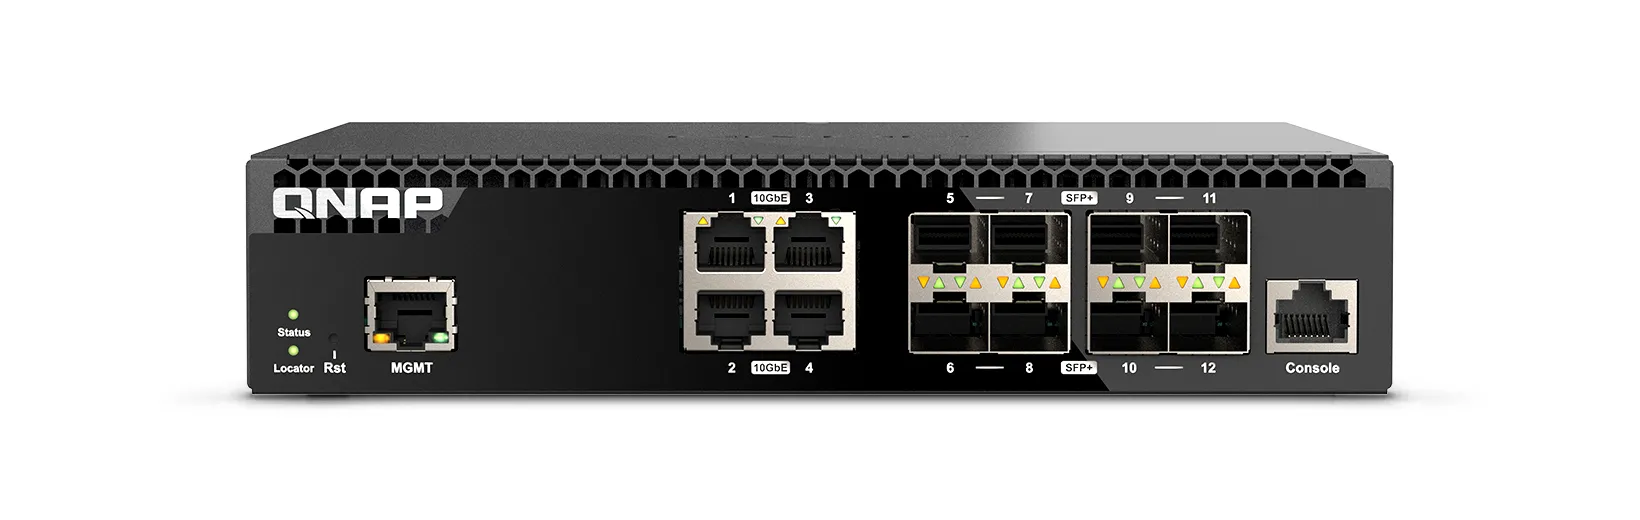 Vente Switchs et Hubs QNAP QSW-M3212R-8S4T Managed Switch 12 port of 10GbE sur hello RSE